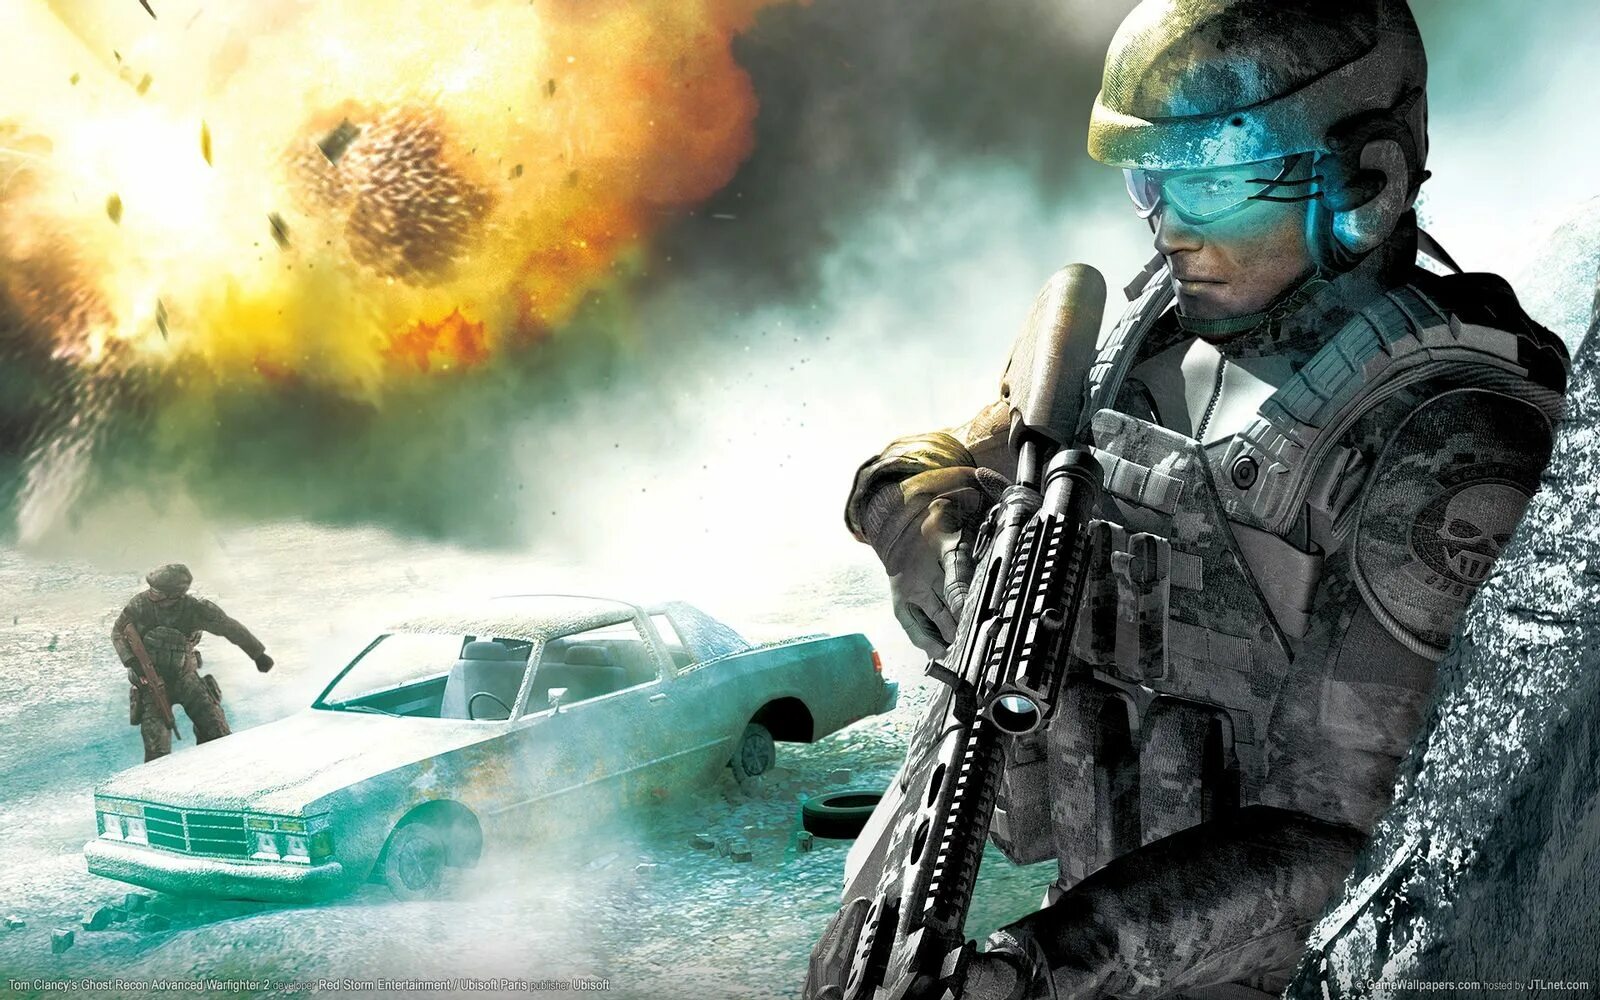 Tom Clancy s Ghost Recon Advanced Warfighter 2. Tom Clancy s Ghost Recon Advanced Warfighter. Tom Clancys Ghost Recon Advanced Warfighter. Tom Clancy s Ghost Recon Advanced Warfighter 2006. Том клэнси tom clancy s